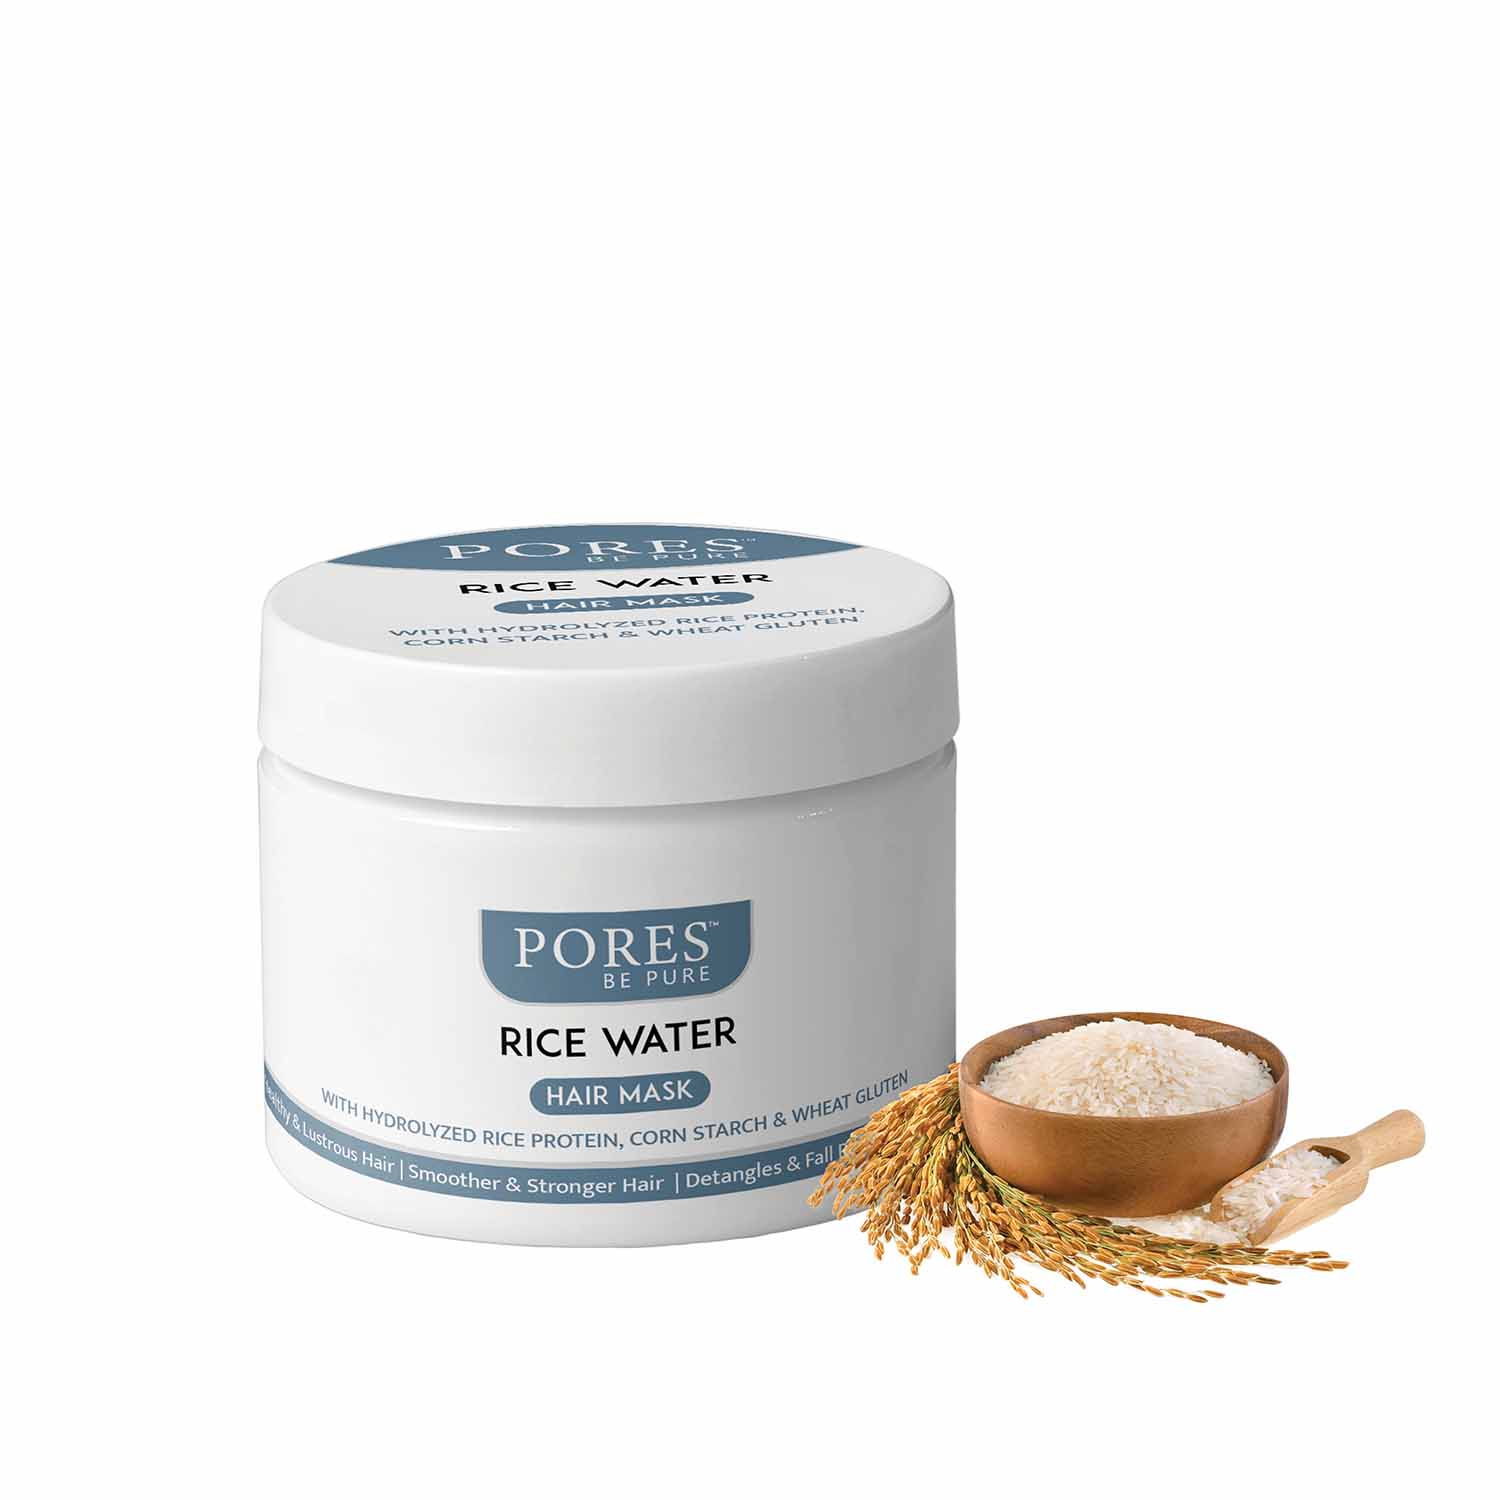 Rice Water Hair Mask by PORES BE PURE